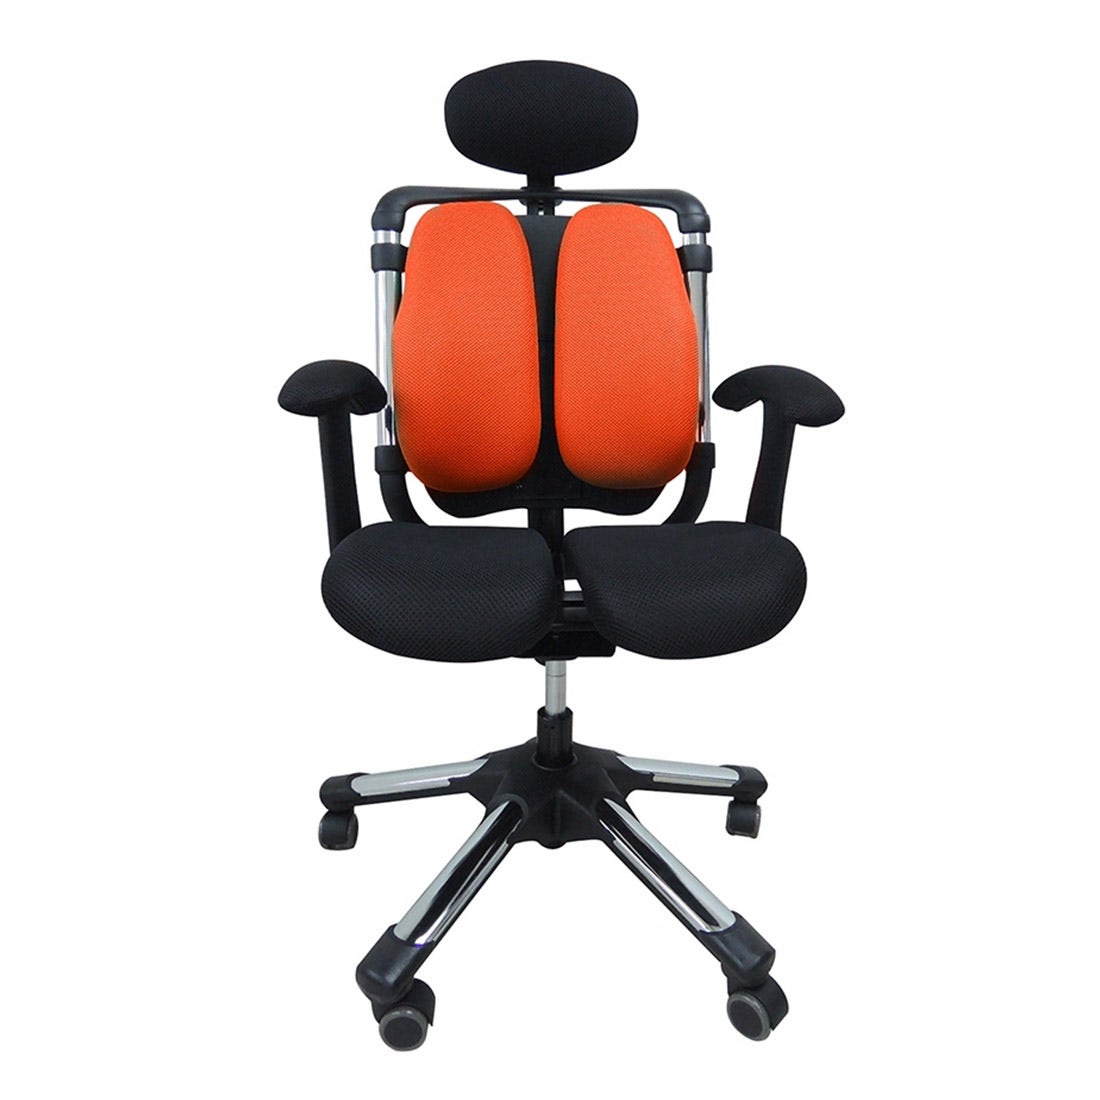 39014954-furniture-home-office-gaming-office-chair-01